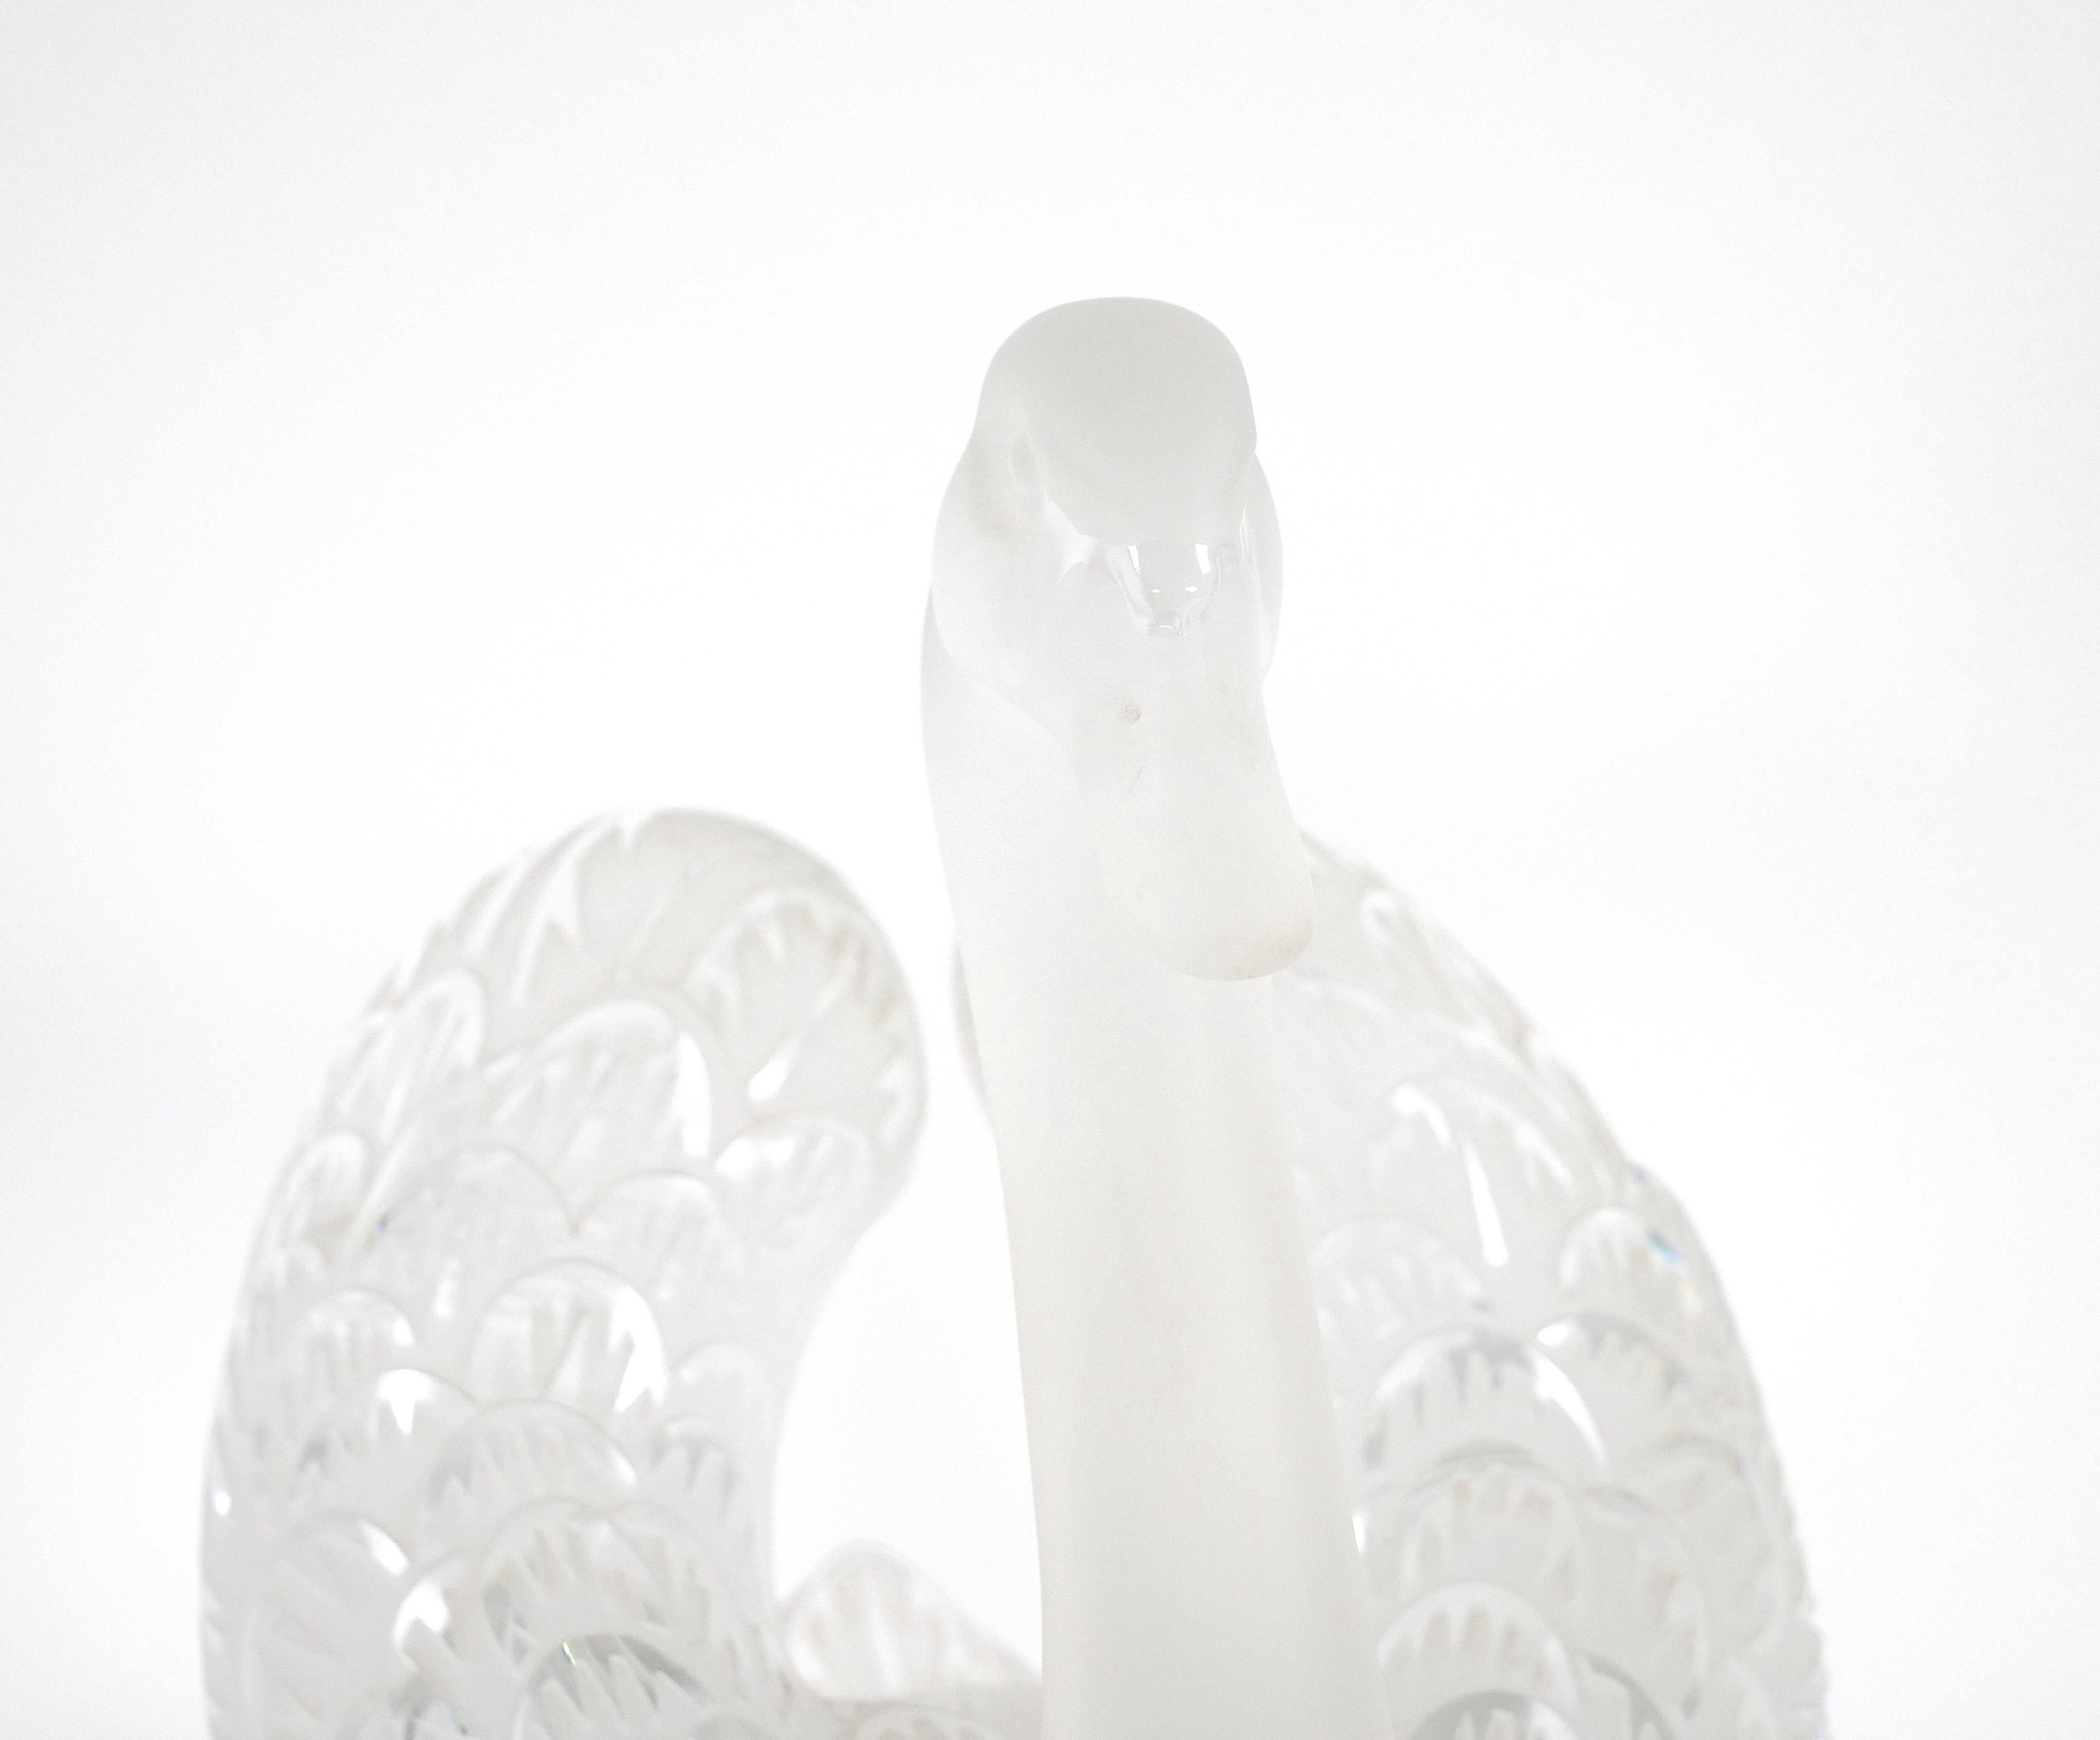  Lalique Crystal Frosted Head Down Swan Sculpture Resting On Mirrored Plateau For Sale 5